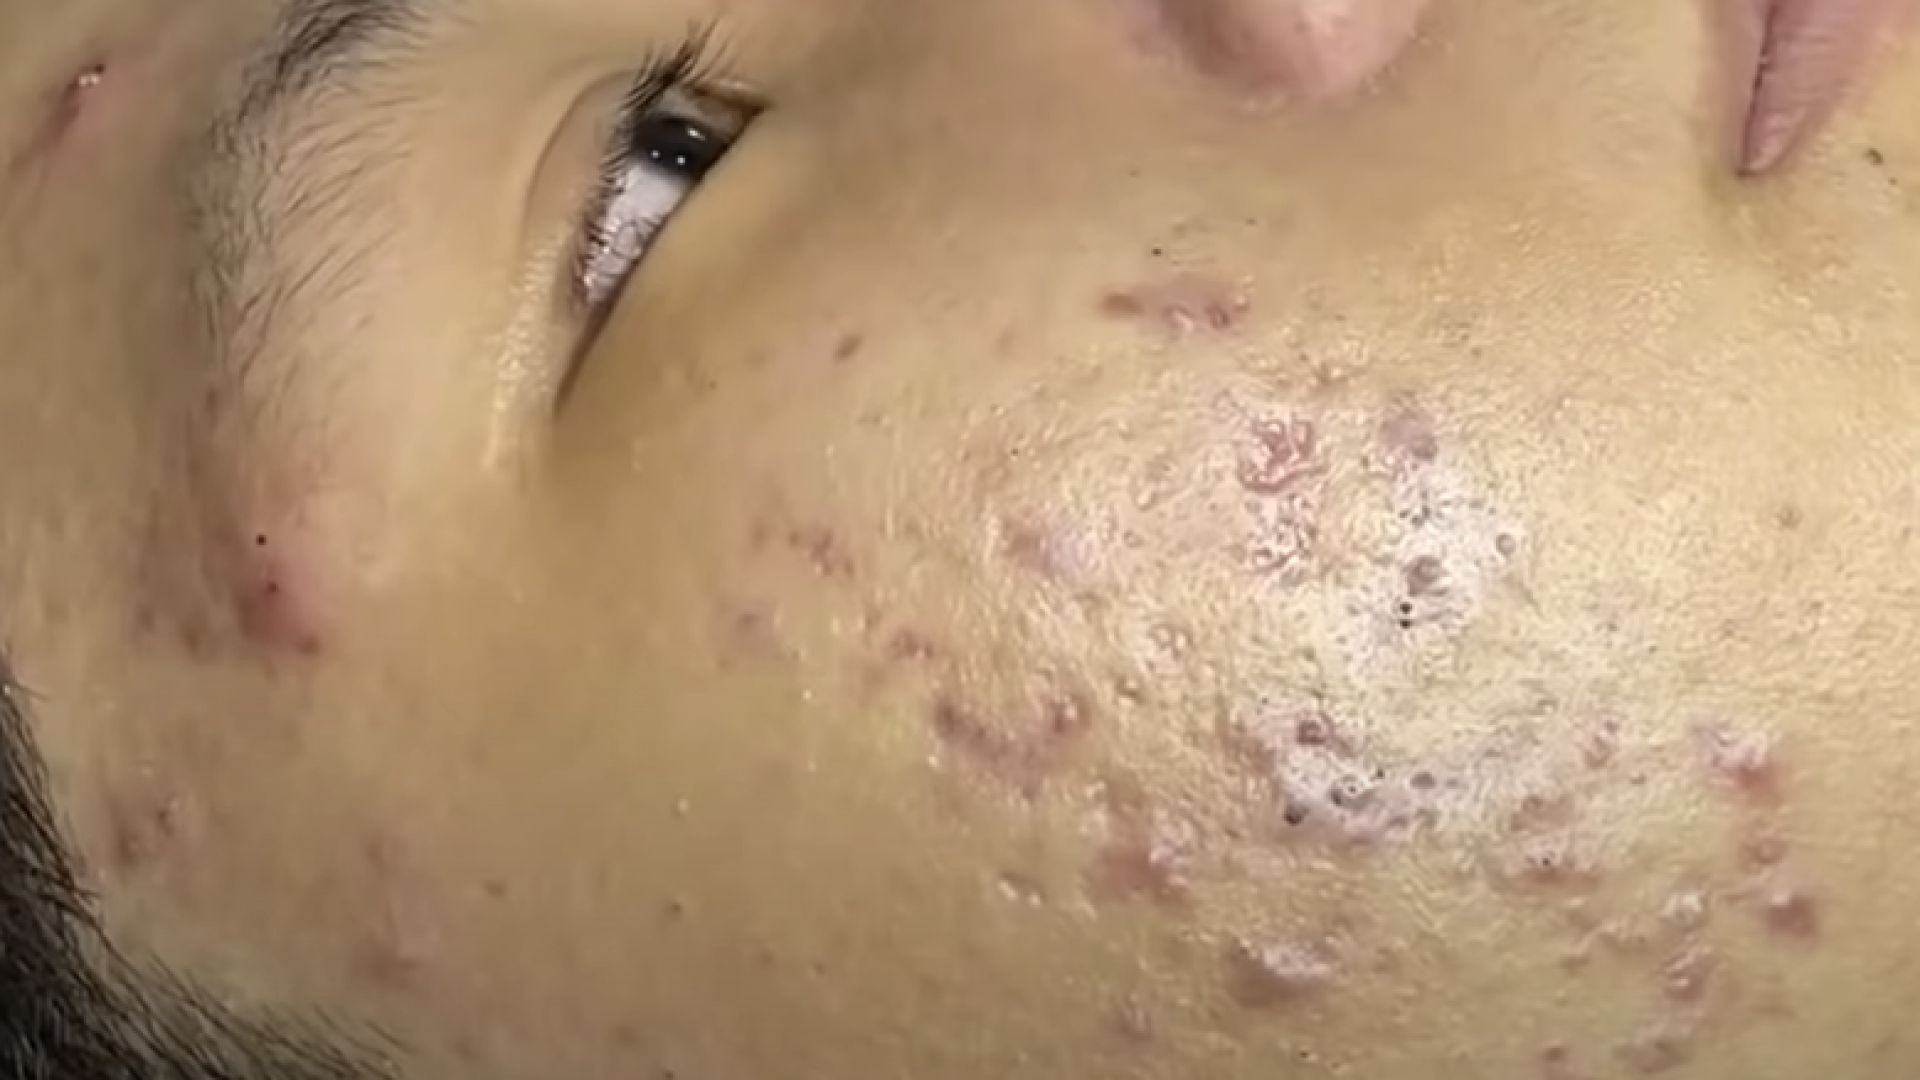 TREATMENT OF BIG BLACKHEADS AND HIDDEN ACNE IN THE FACE